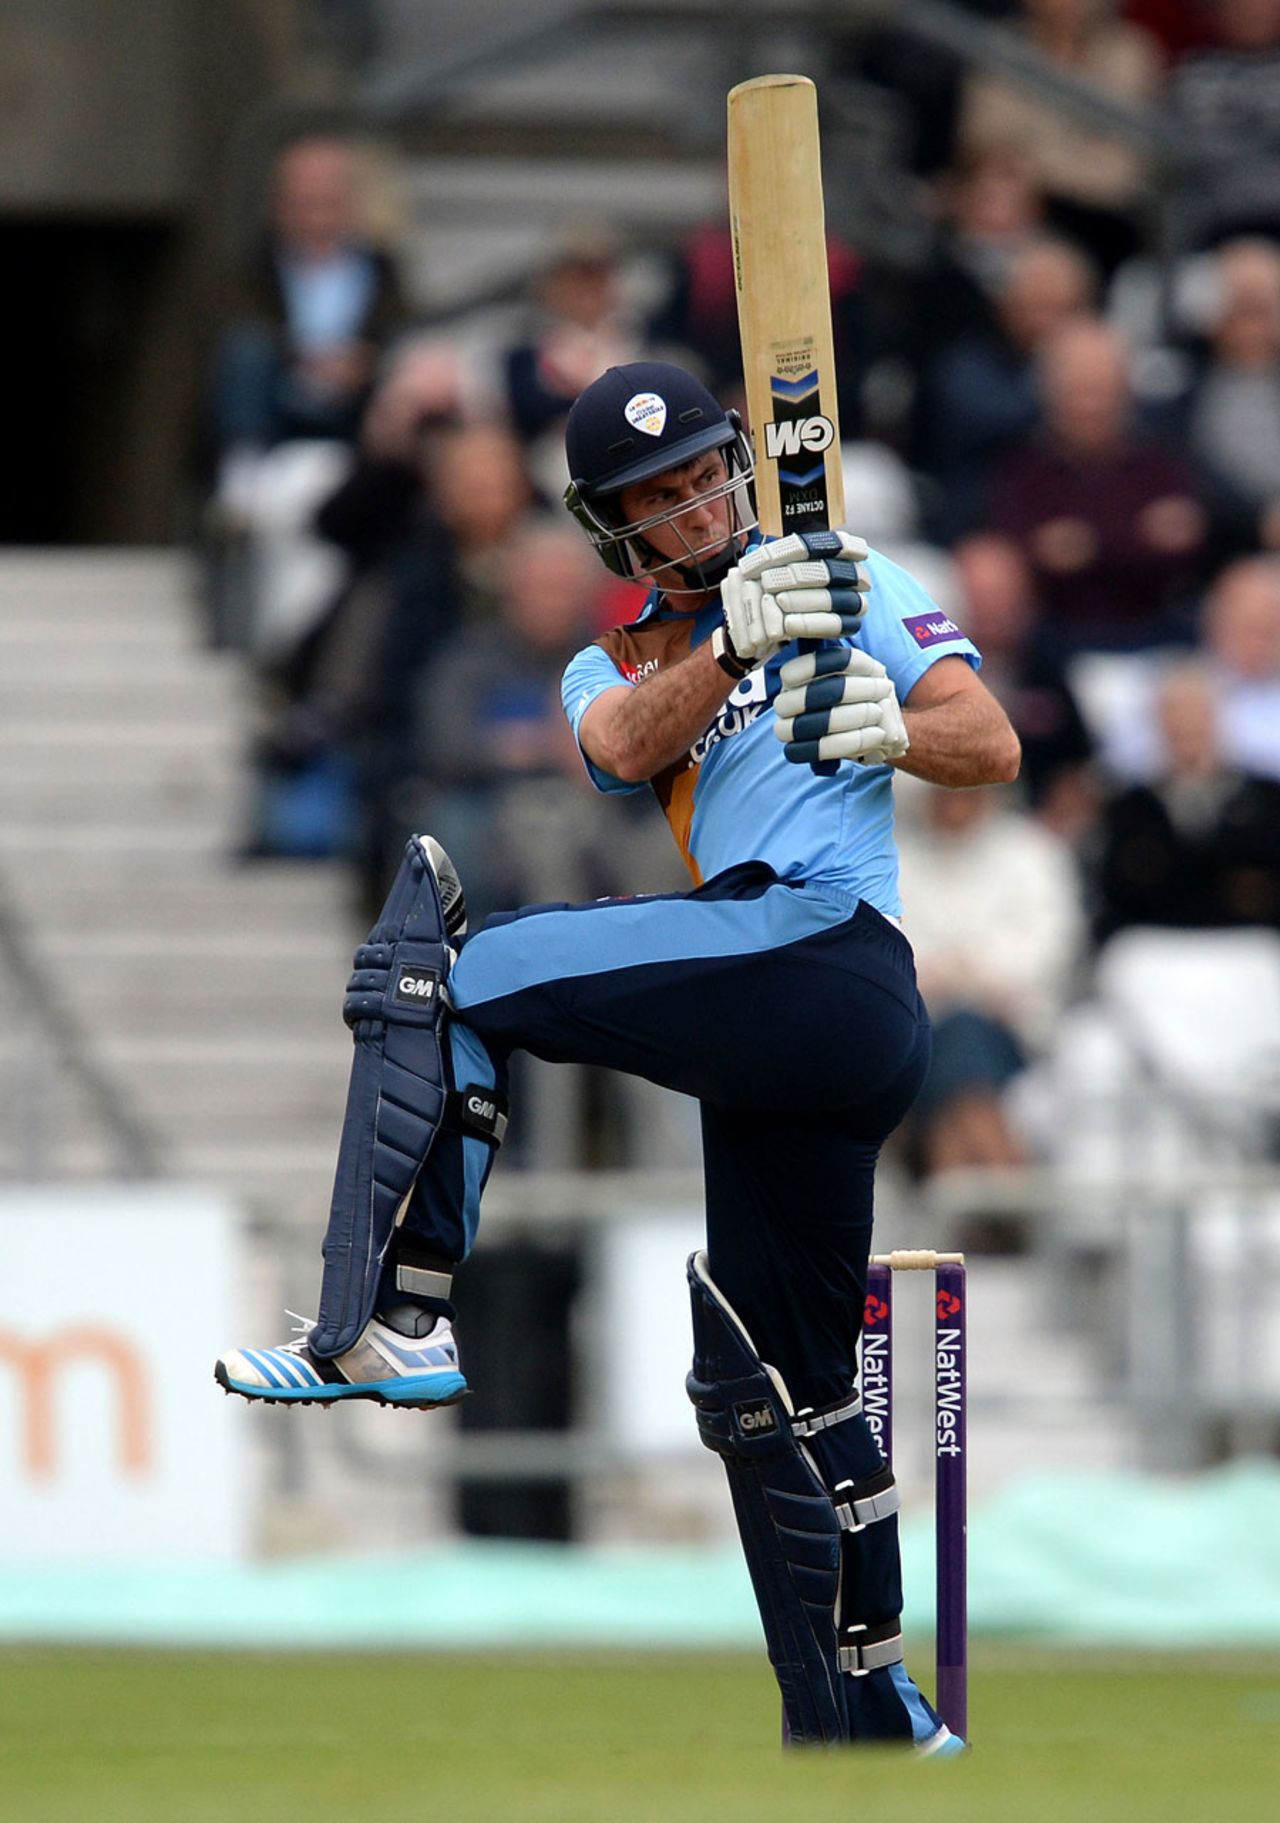 Wayne Madsen top-scored for Derbyshire with a run-a-ball 34, Yorkshire v Derbyshire, NatWest T20 Blast, North Division, Headingley, May 30, 2014